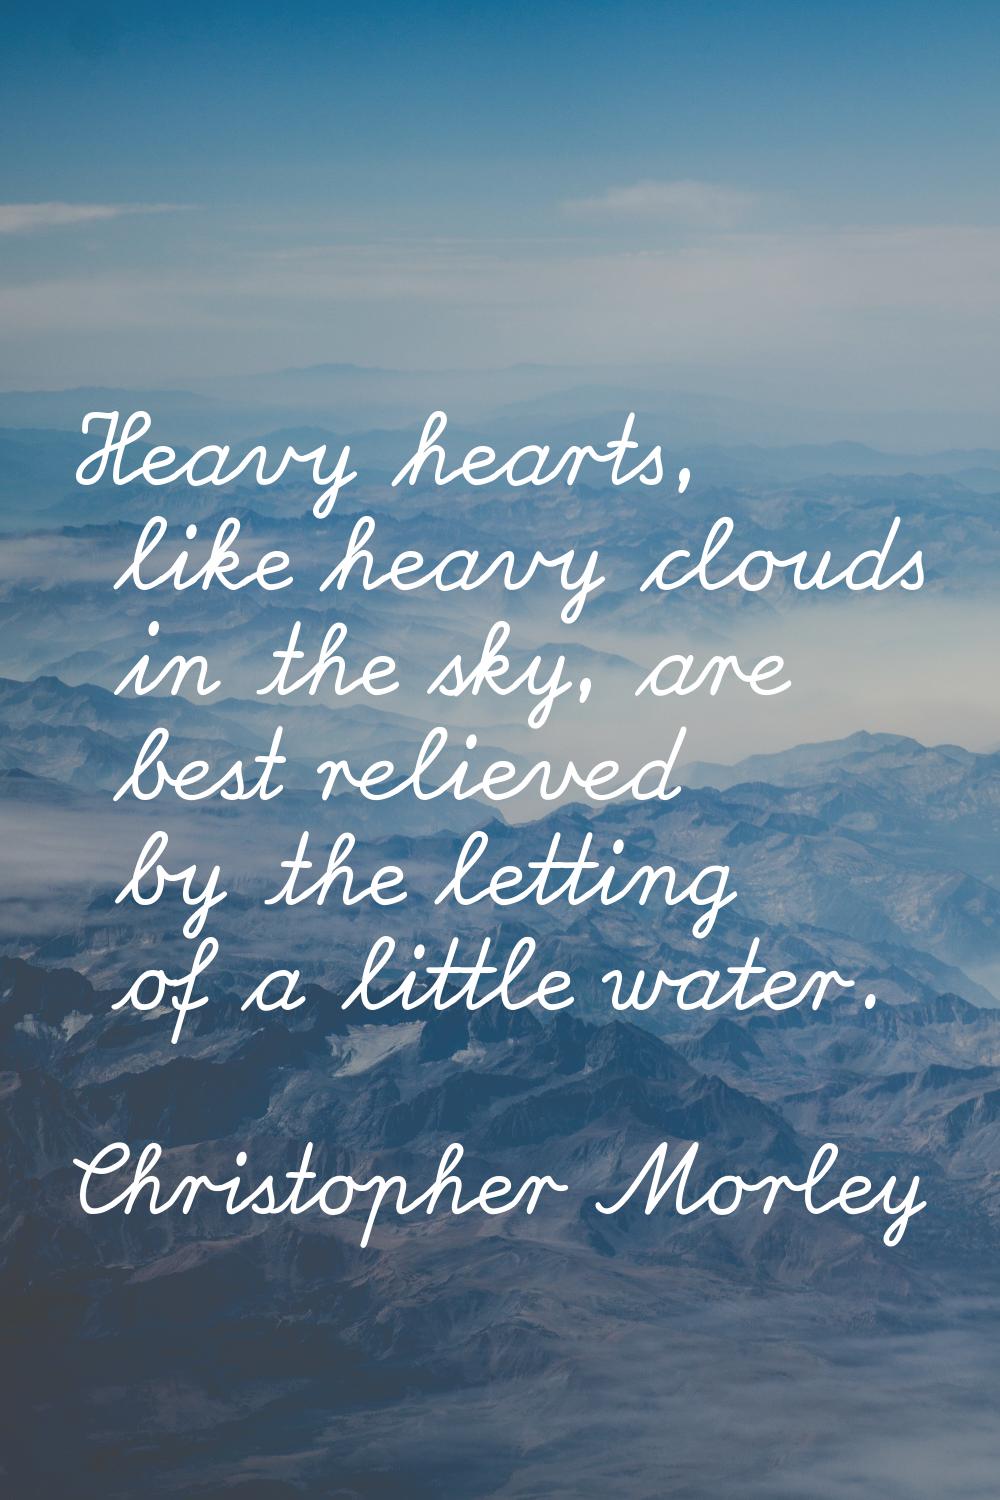 Heavy hearts, like heavy clouds in the sky, are best relieved by the letting of a little water.